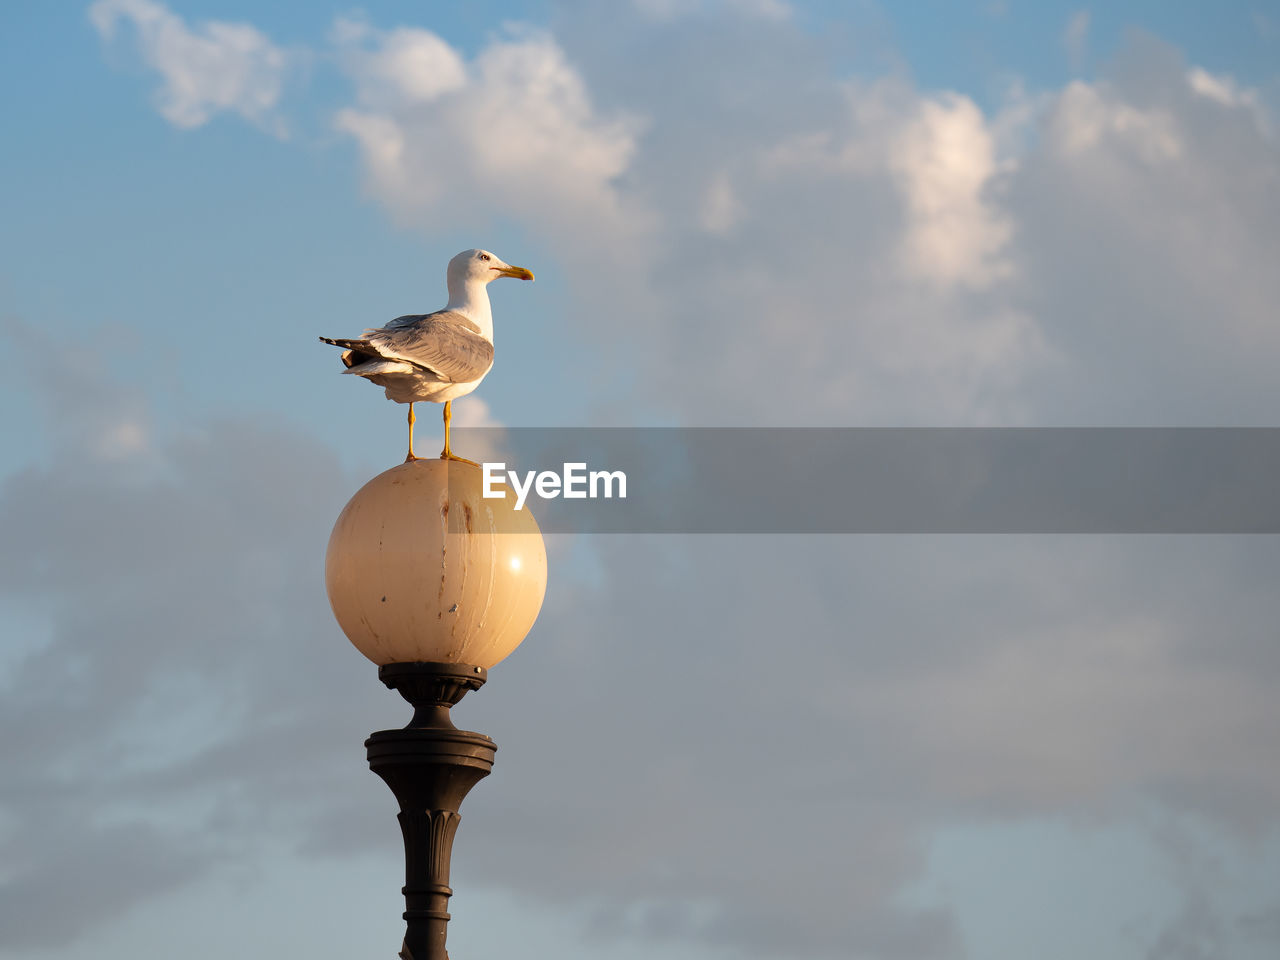 Seagull on a round lamp and the sky with clouds in the background.